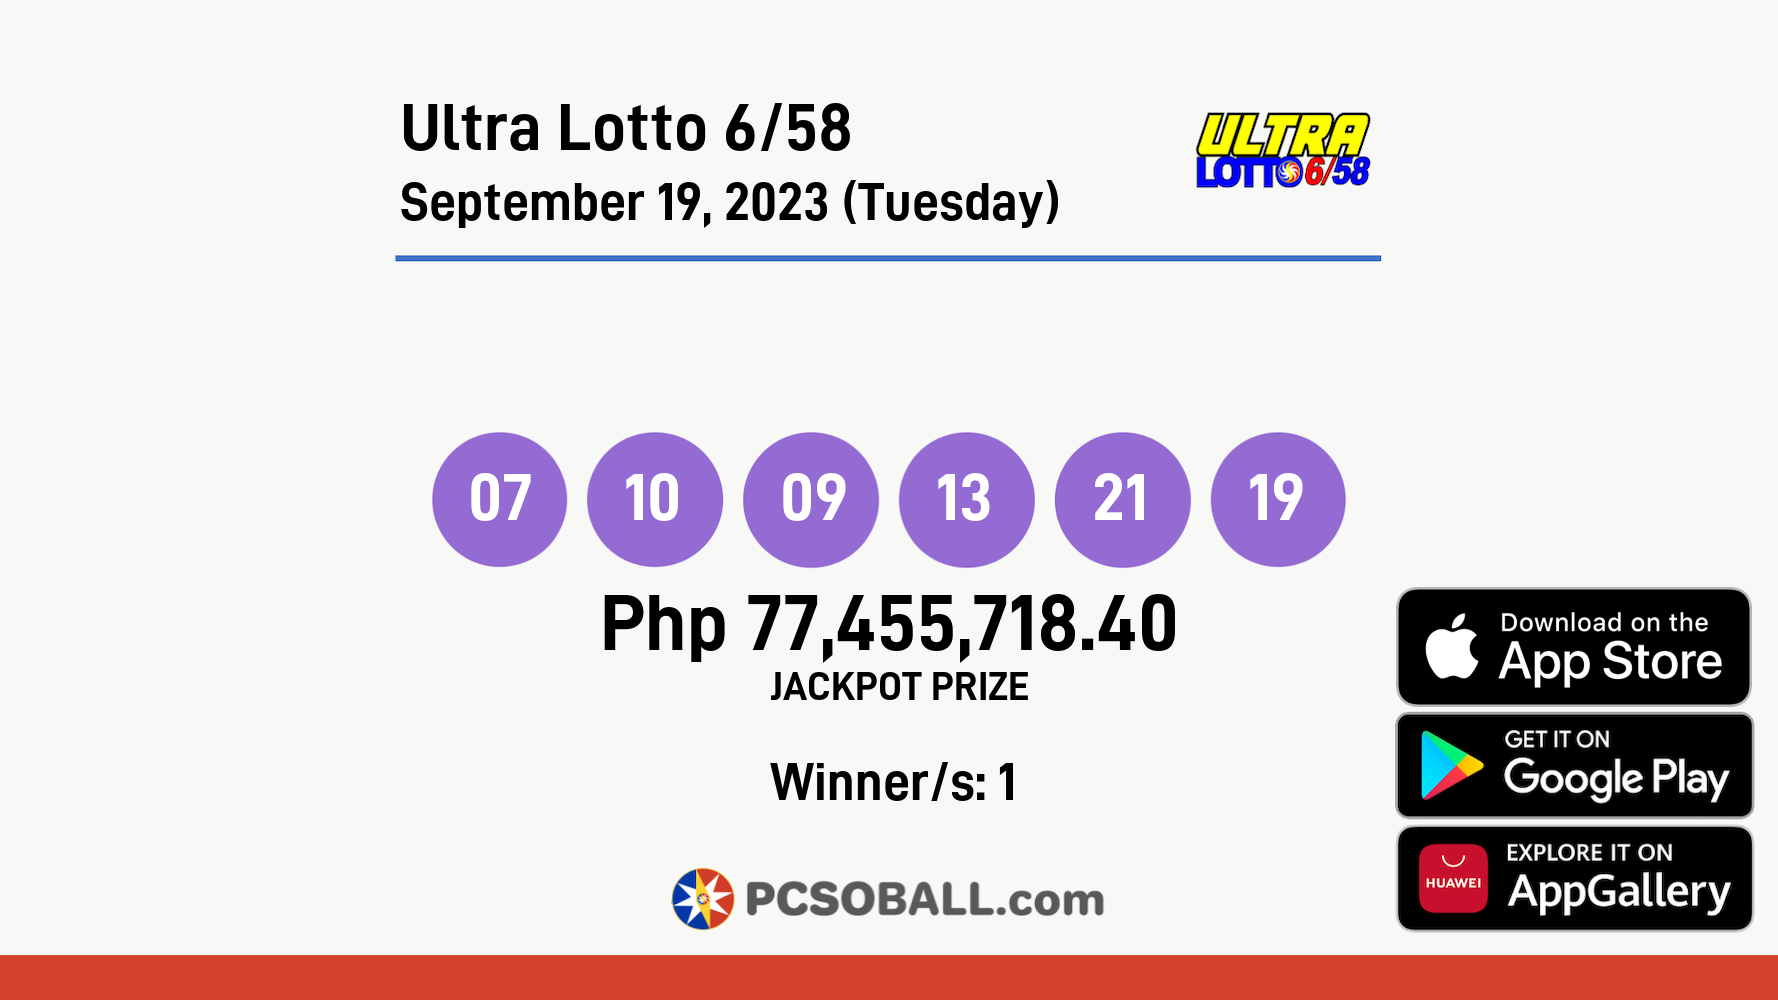 Ultra Lotto 6/58 September 19, 2023 (Tuesday) Result